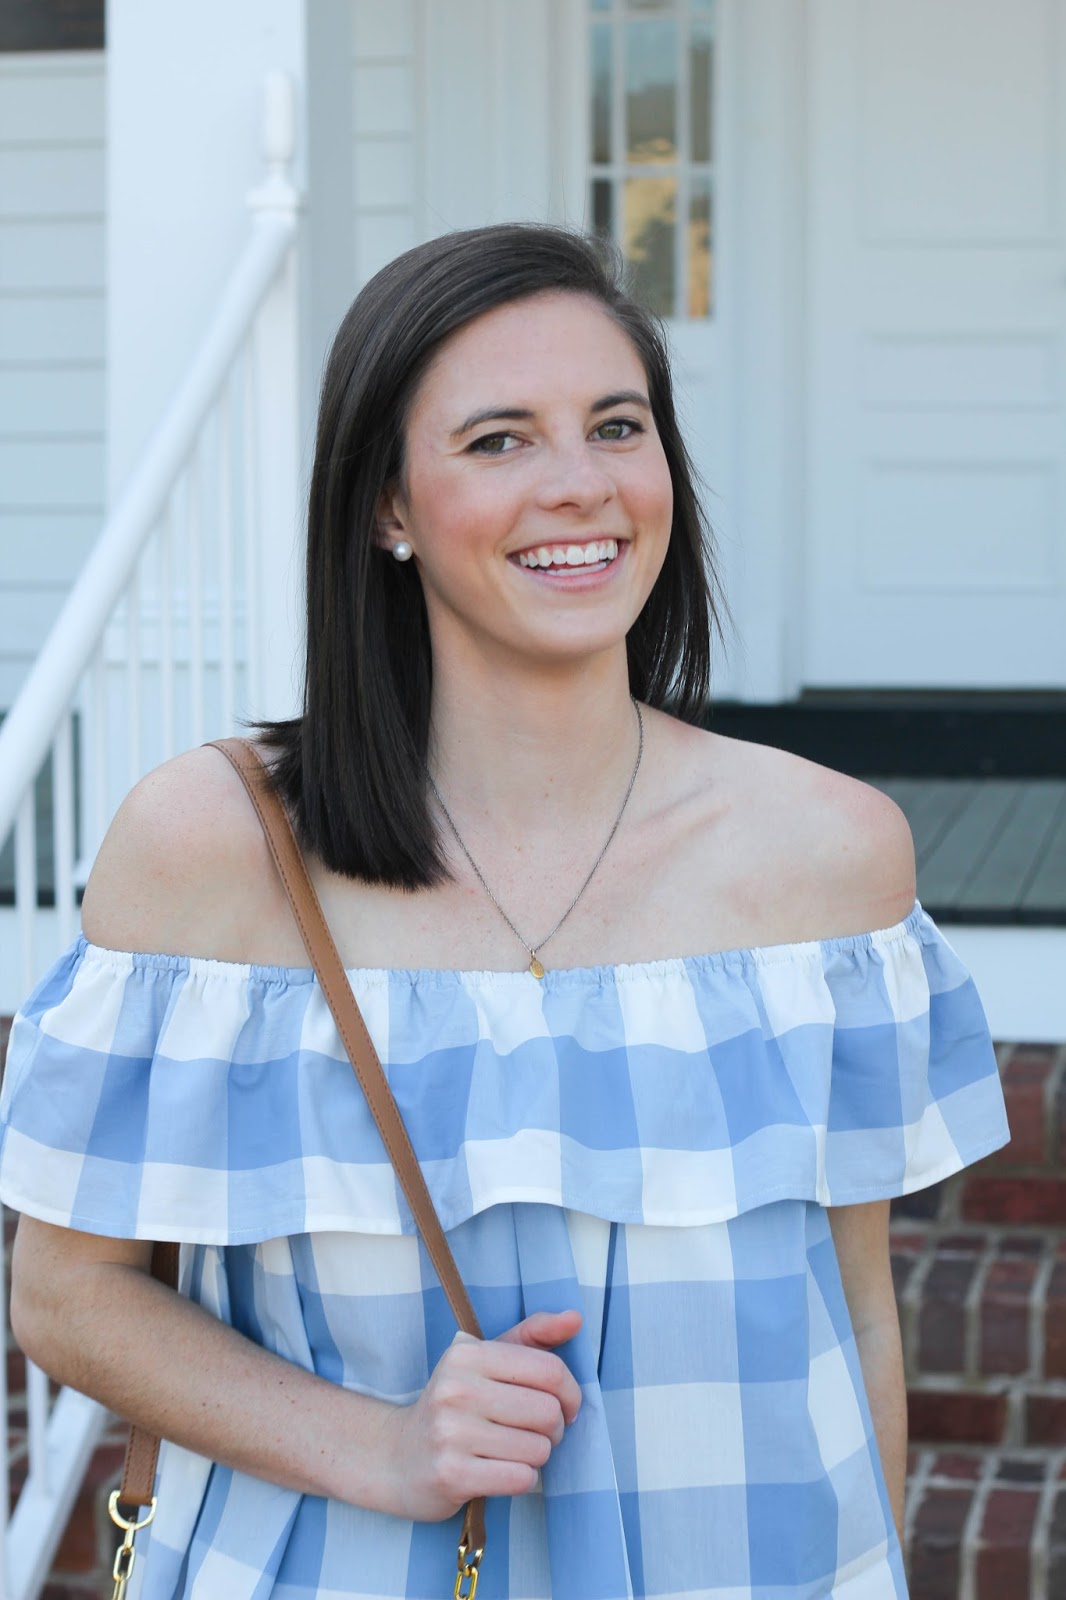 Prep In Your Step: Blue and White Gingham